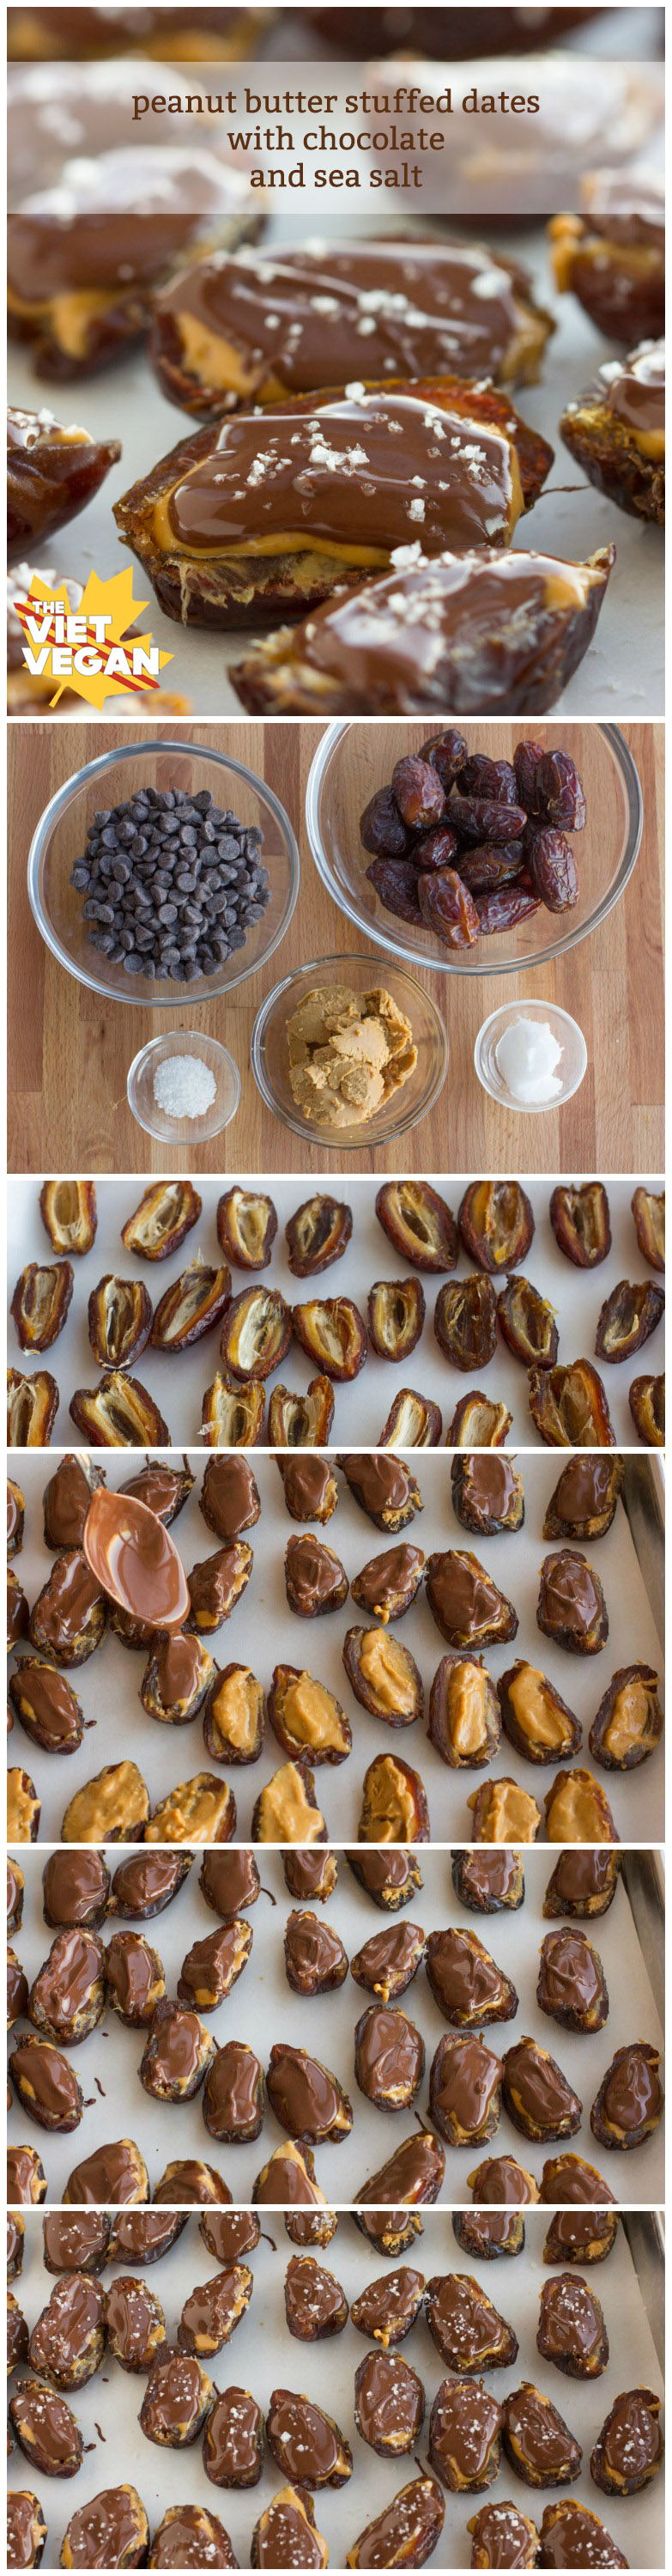 Peanut Butter Stuffed Dates with Chocolate and Sea Salt